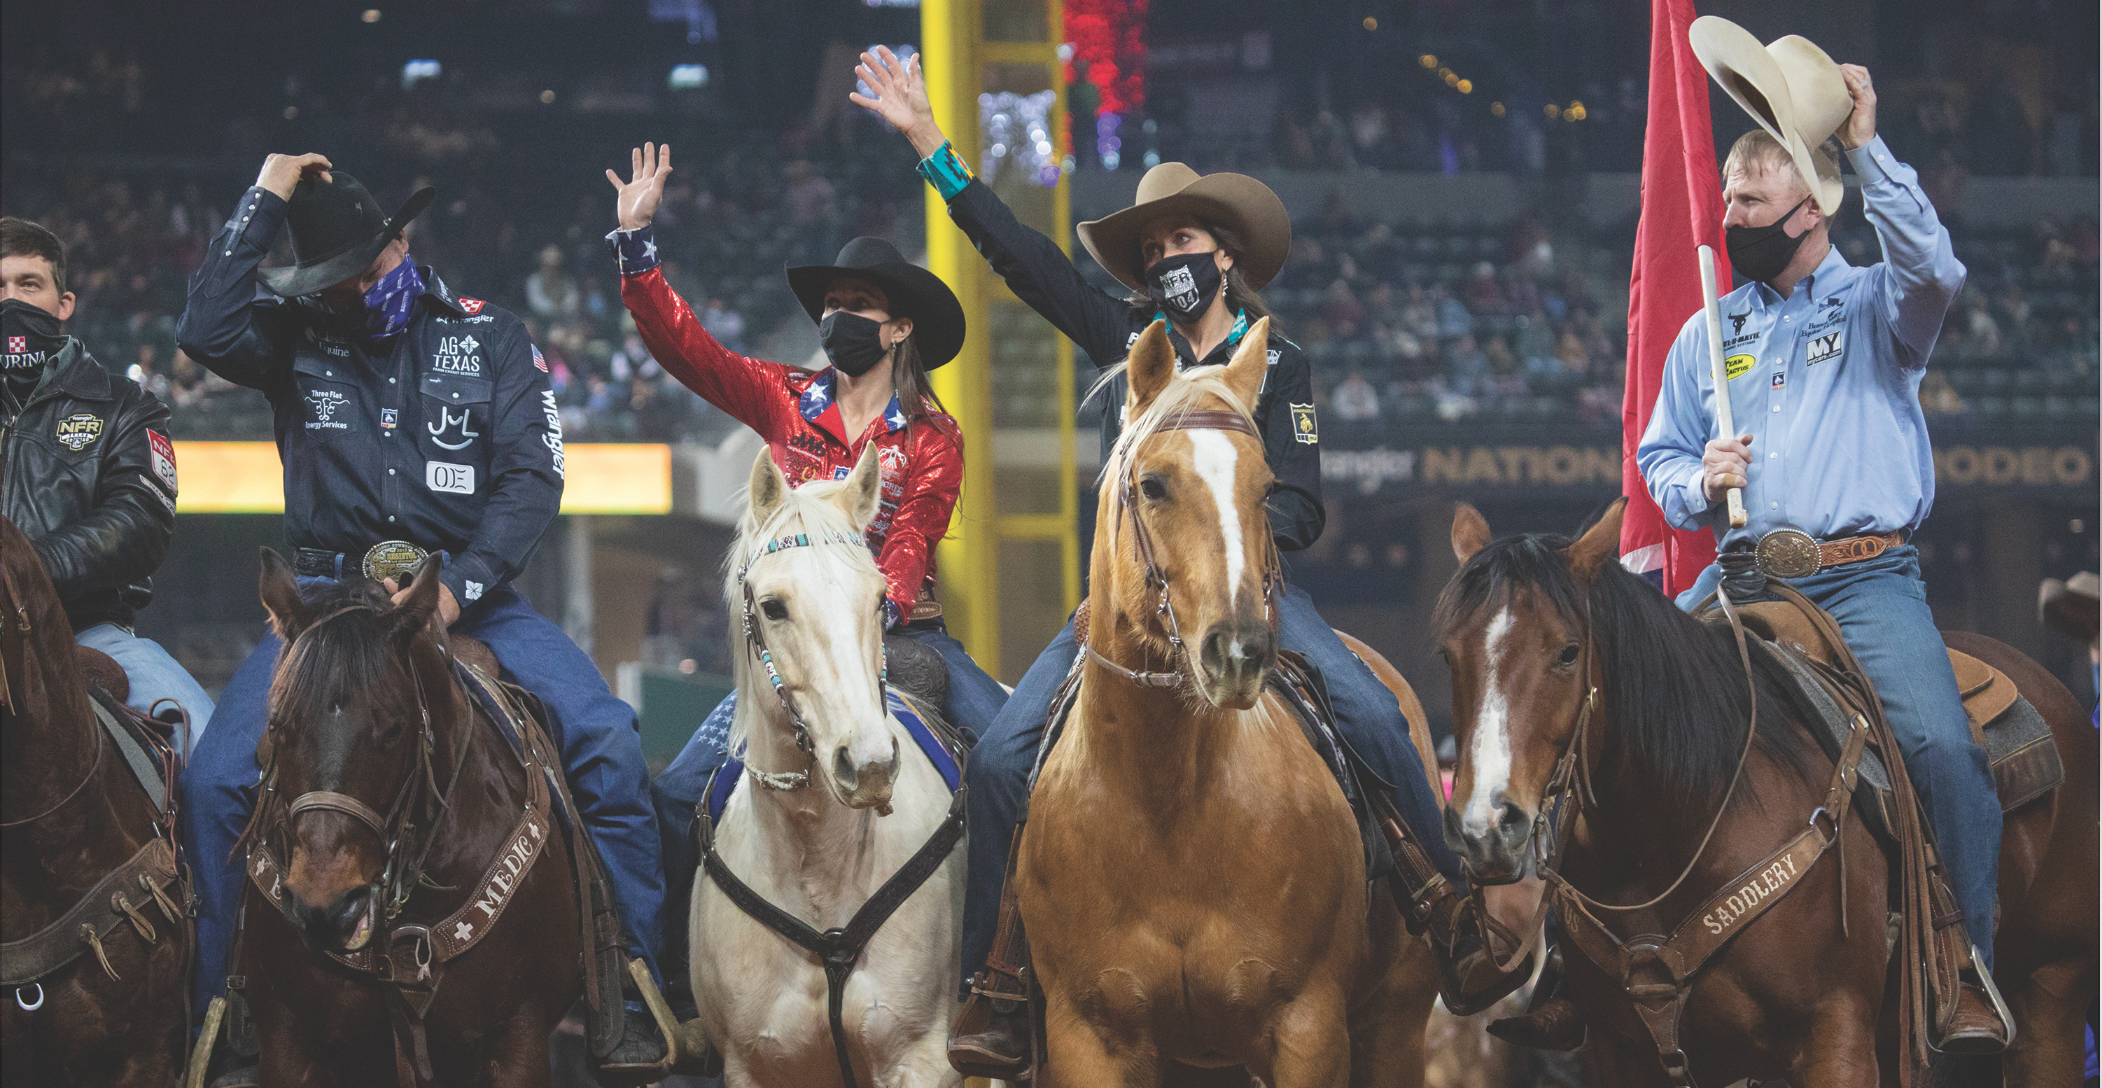 NFR Round 2: Recap, Highlights and Payouts - The Cowboy Channel